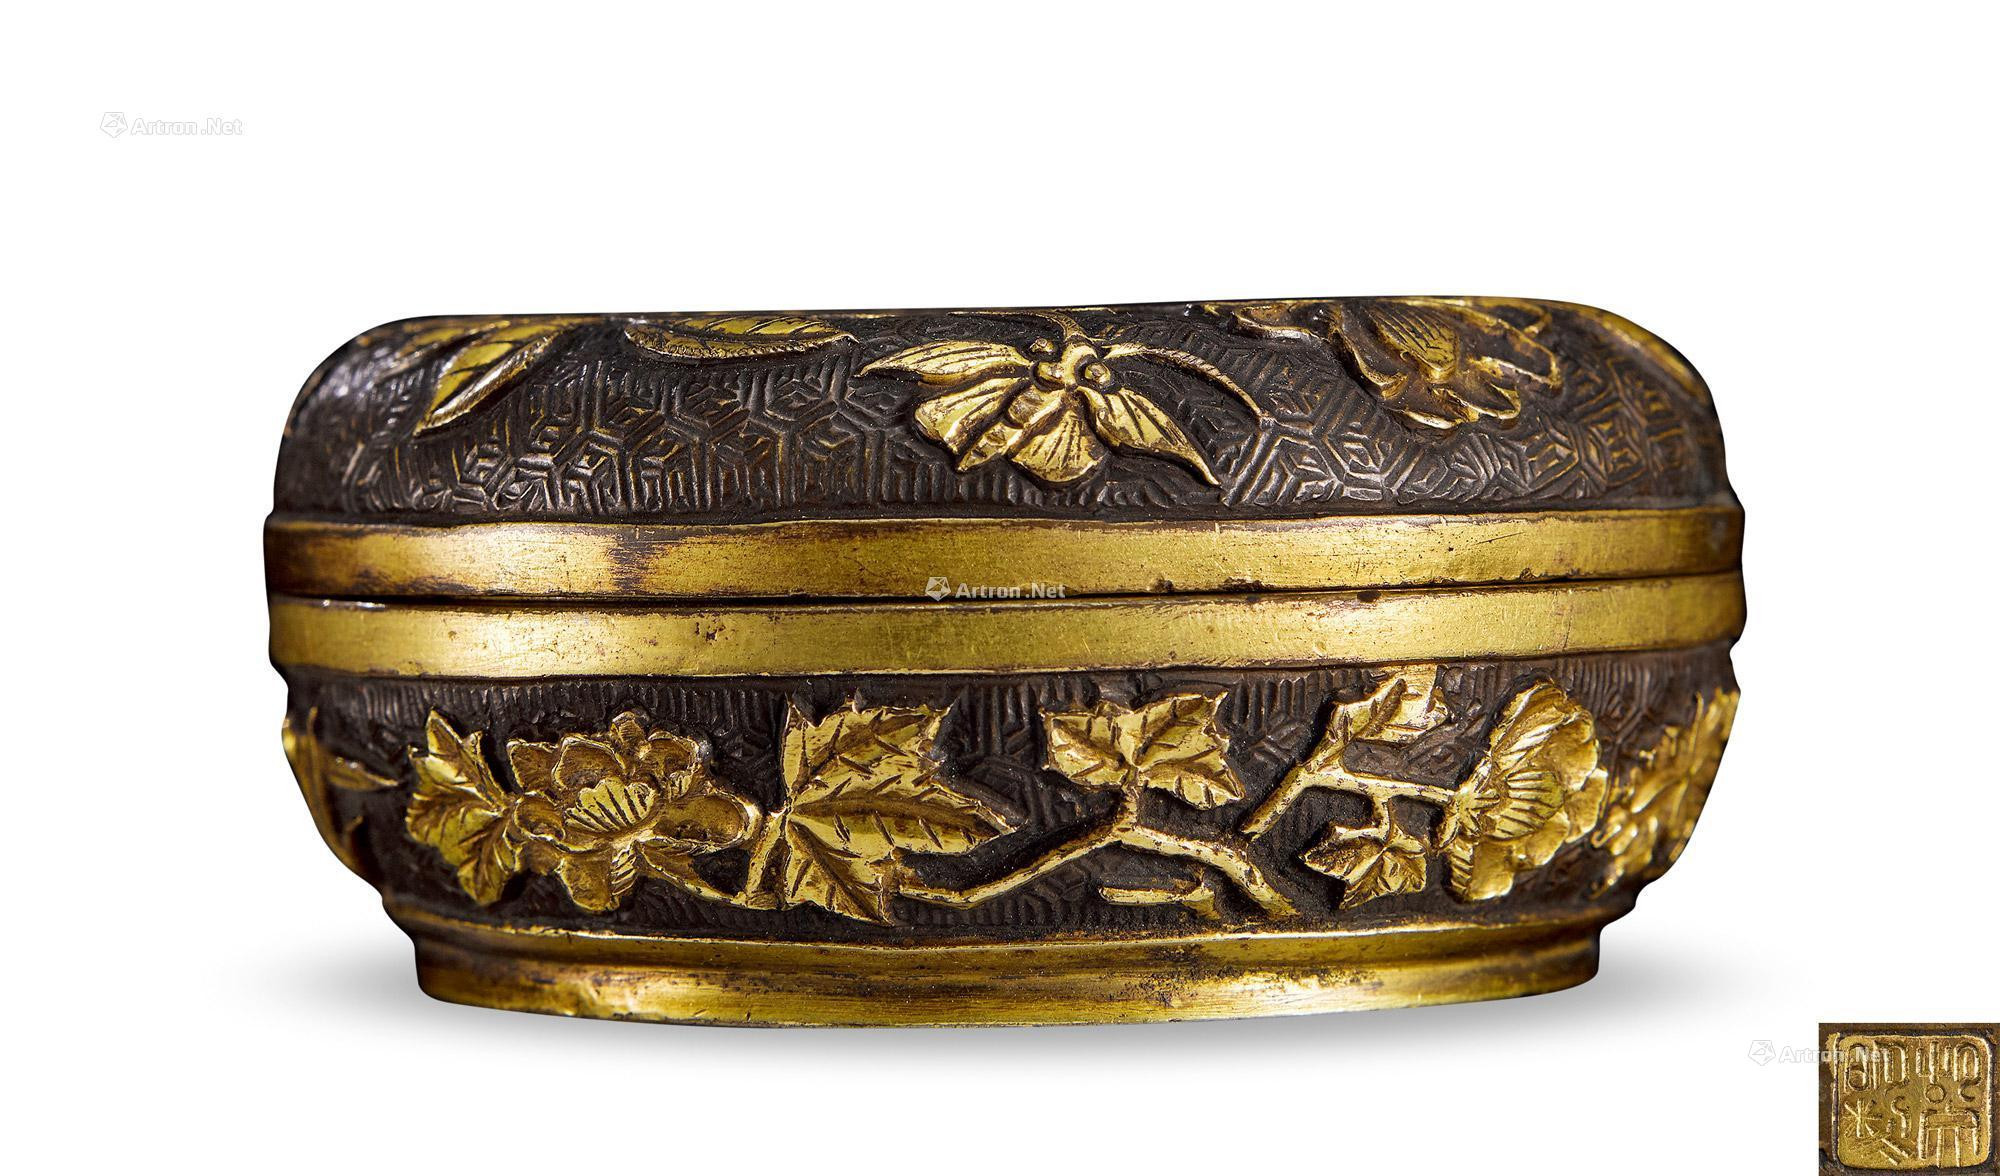 A PARCEL-GILT BRONZE INCENSE BOX AND COVER